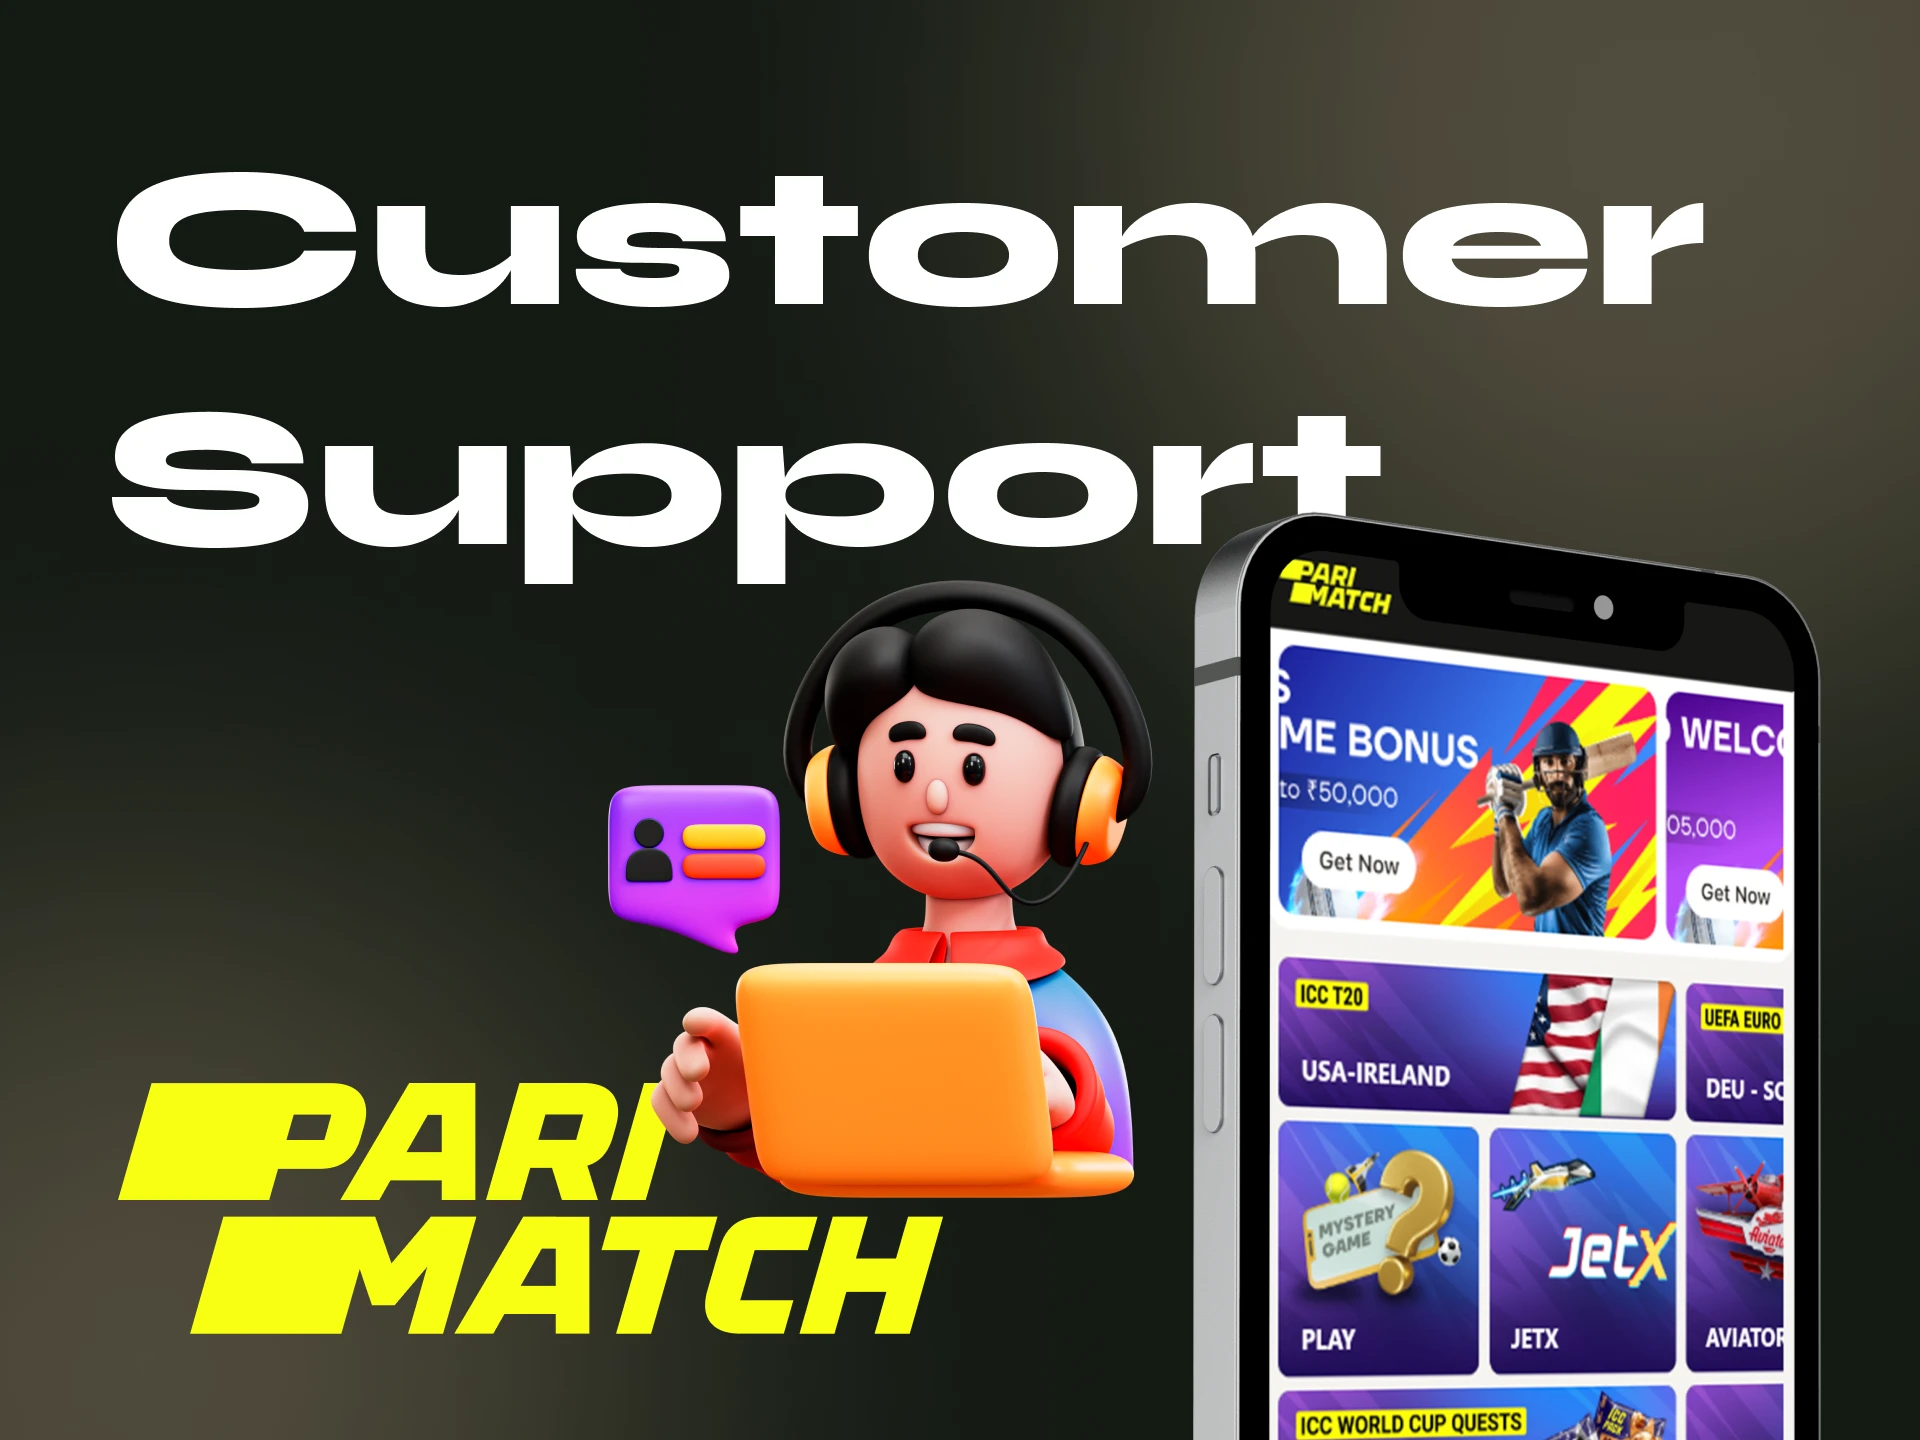 What are the ways to contact the technical support service of the Parimatch online casino.